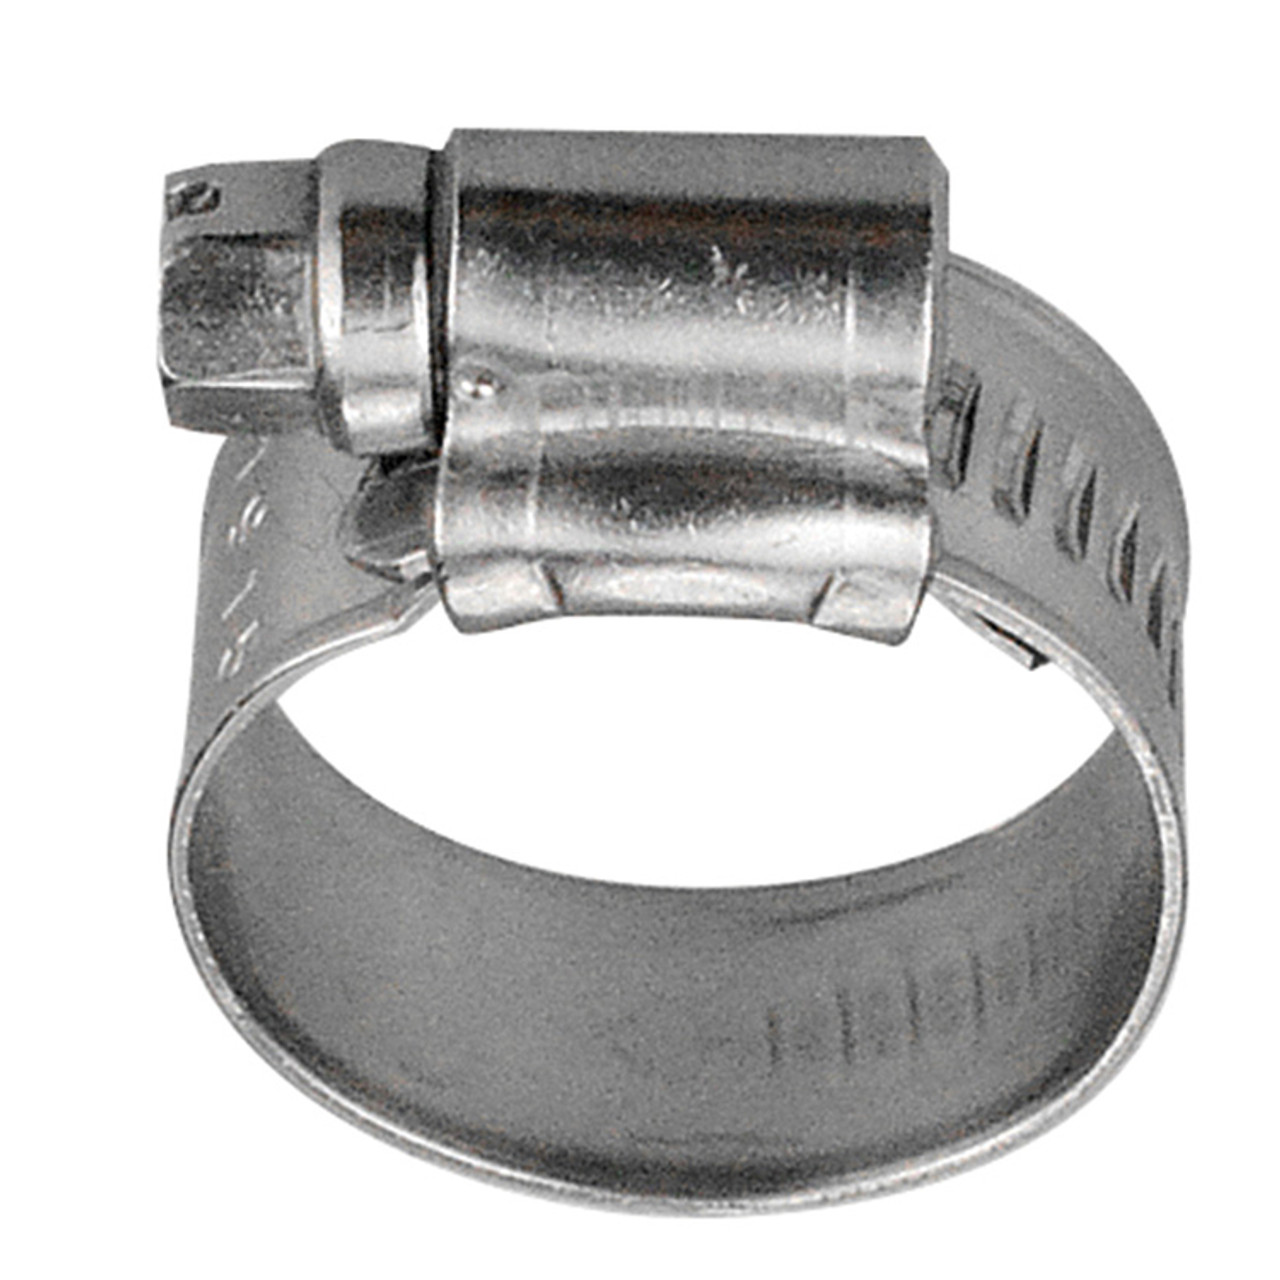 1.26 - 2.24" Stainless Mini Gear Clamp  G5A-28